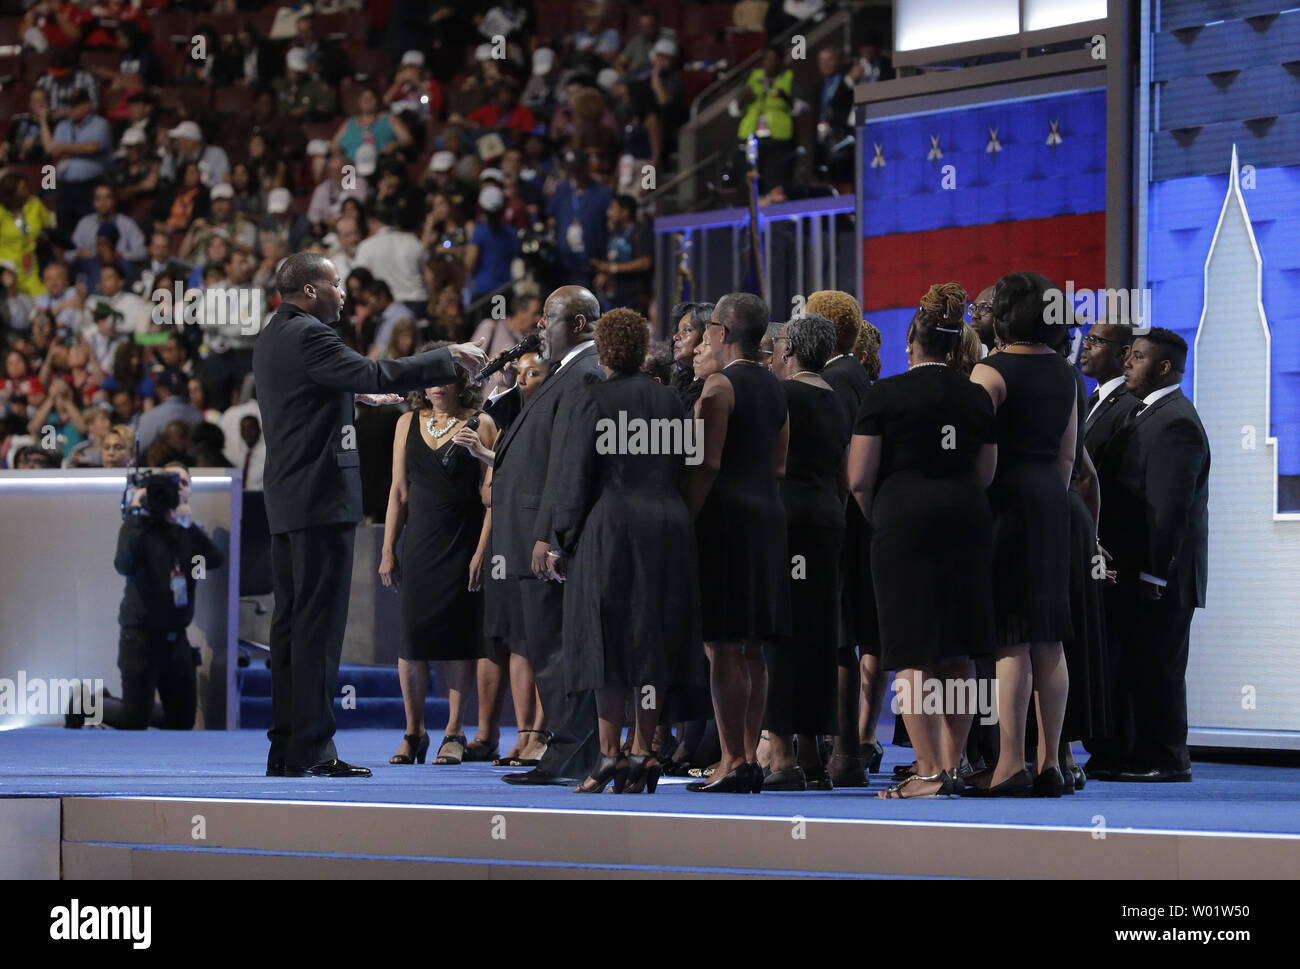 The Mother Emanuel AME Church Choir from Philadelphia perform the 'Battle Hymn of the Republic' on day one of the Democratic National Convention at the Wells Fargo Center in Philadelphia, Pennsylvania on Monday, July 25, 2016. The four-day convention starts on Monday, July 25th, and is expected to nominate Hillary Clinton for president of the United States. Photo by Ray Stubblebine/UPI Stock Photo